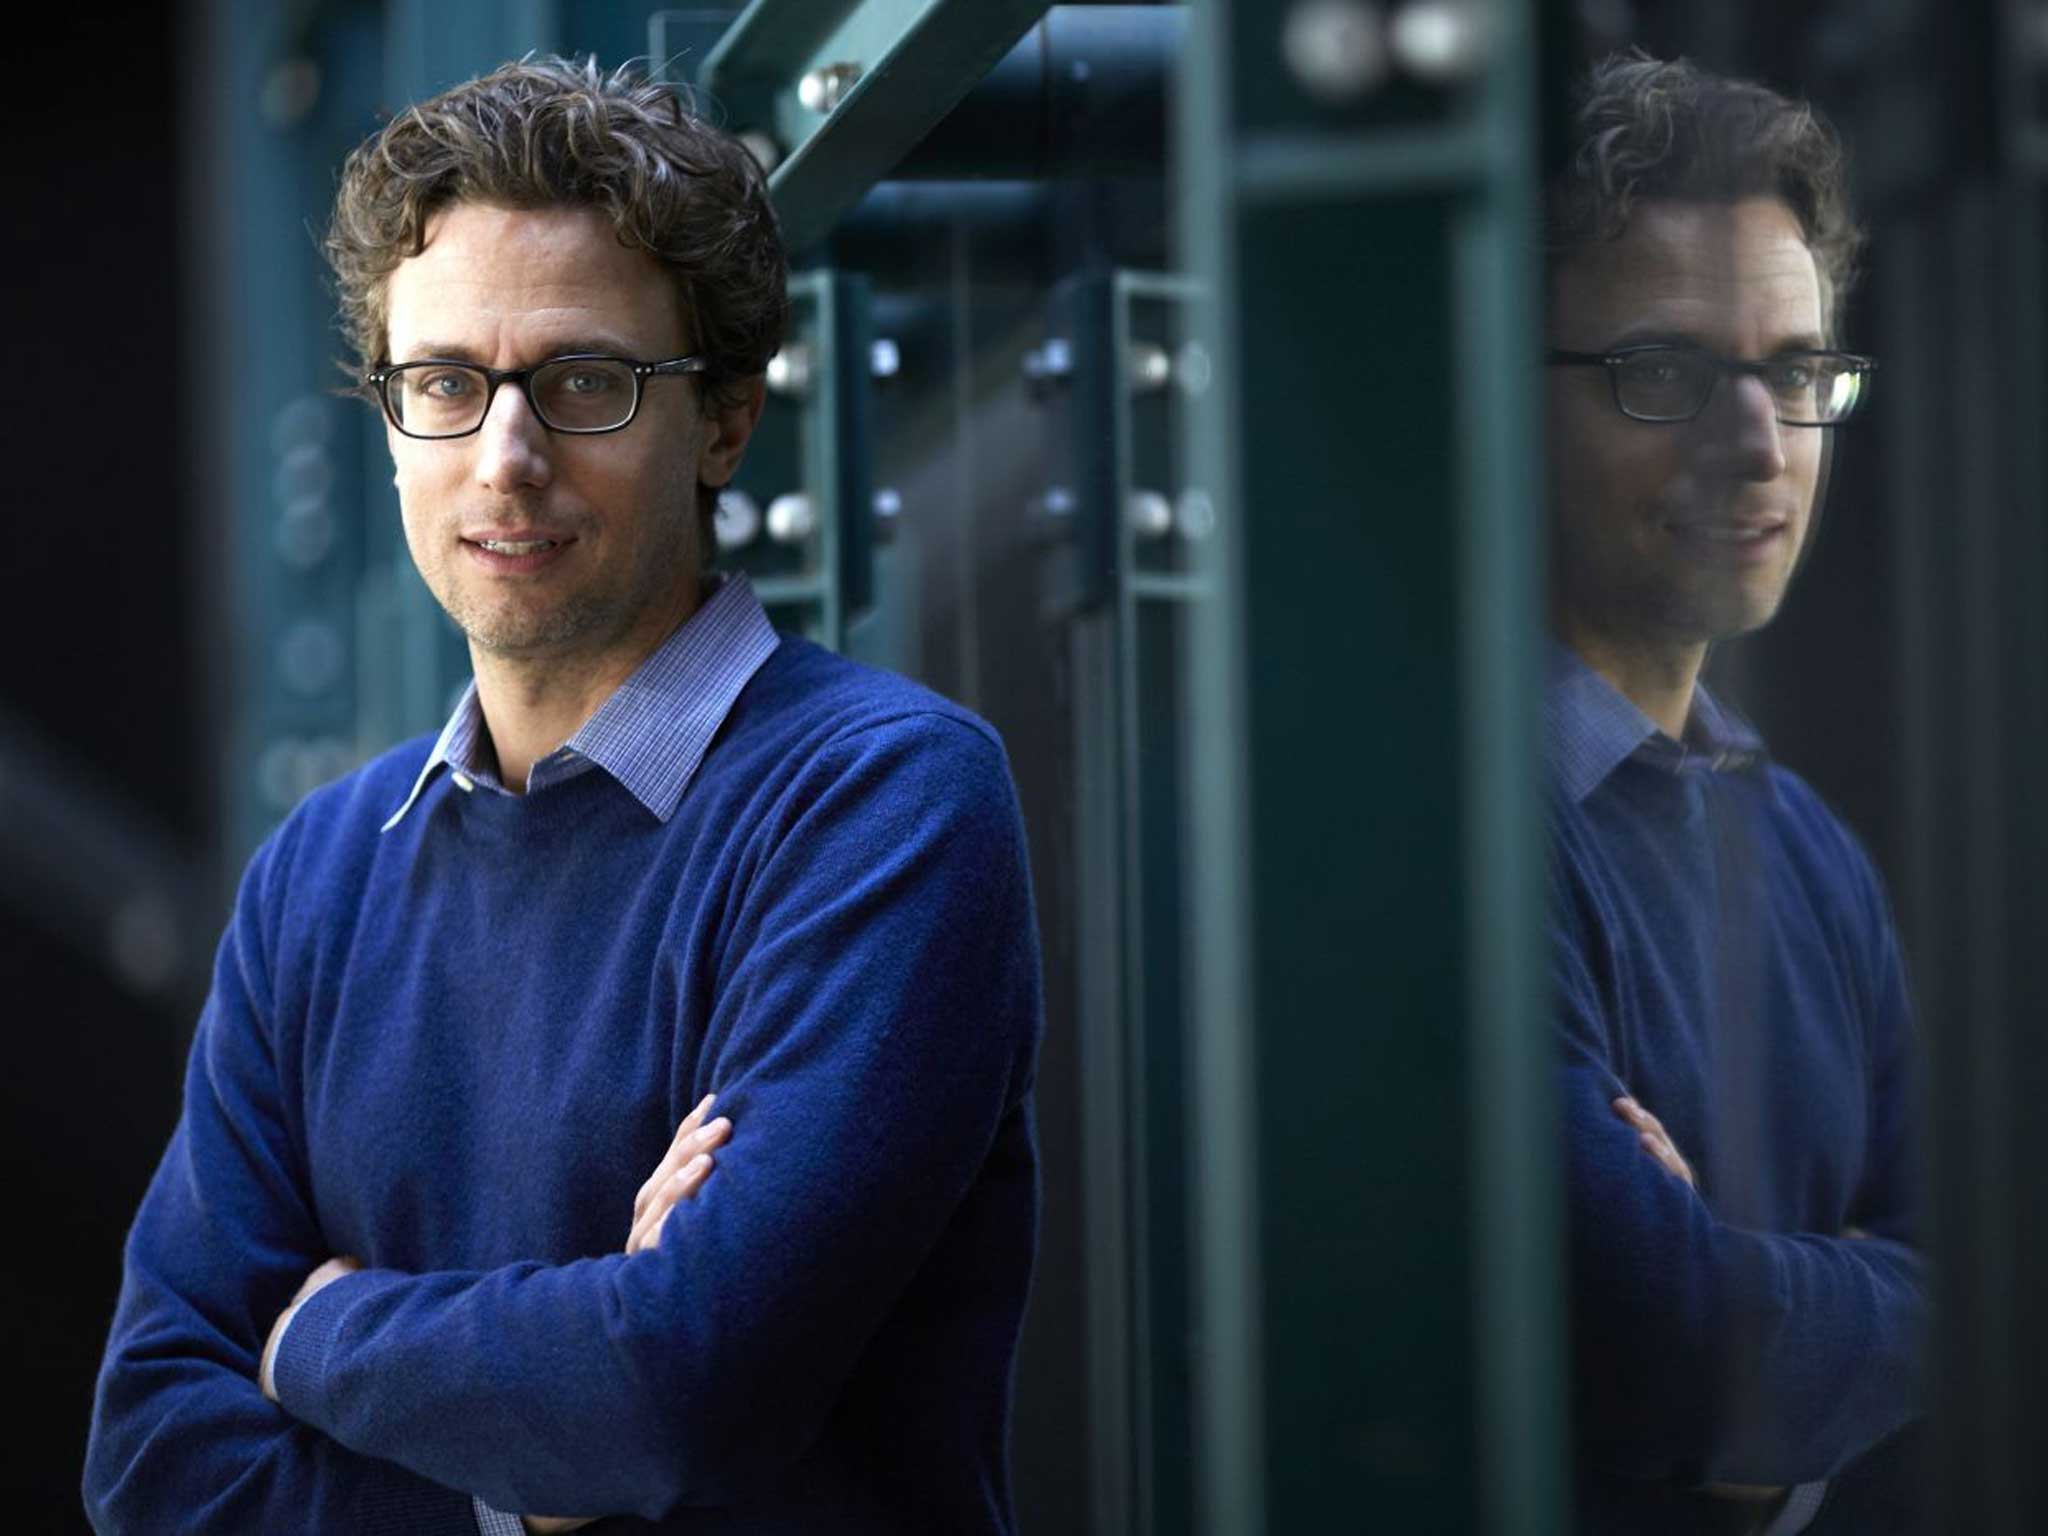 Peretti is the founder of Buzzfeed and creator of the 'share' button